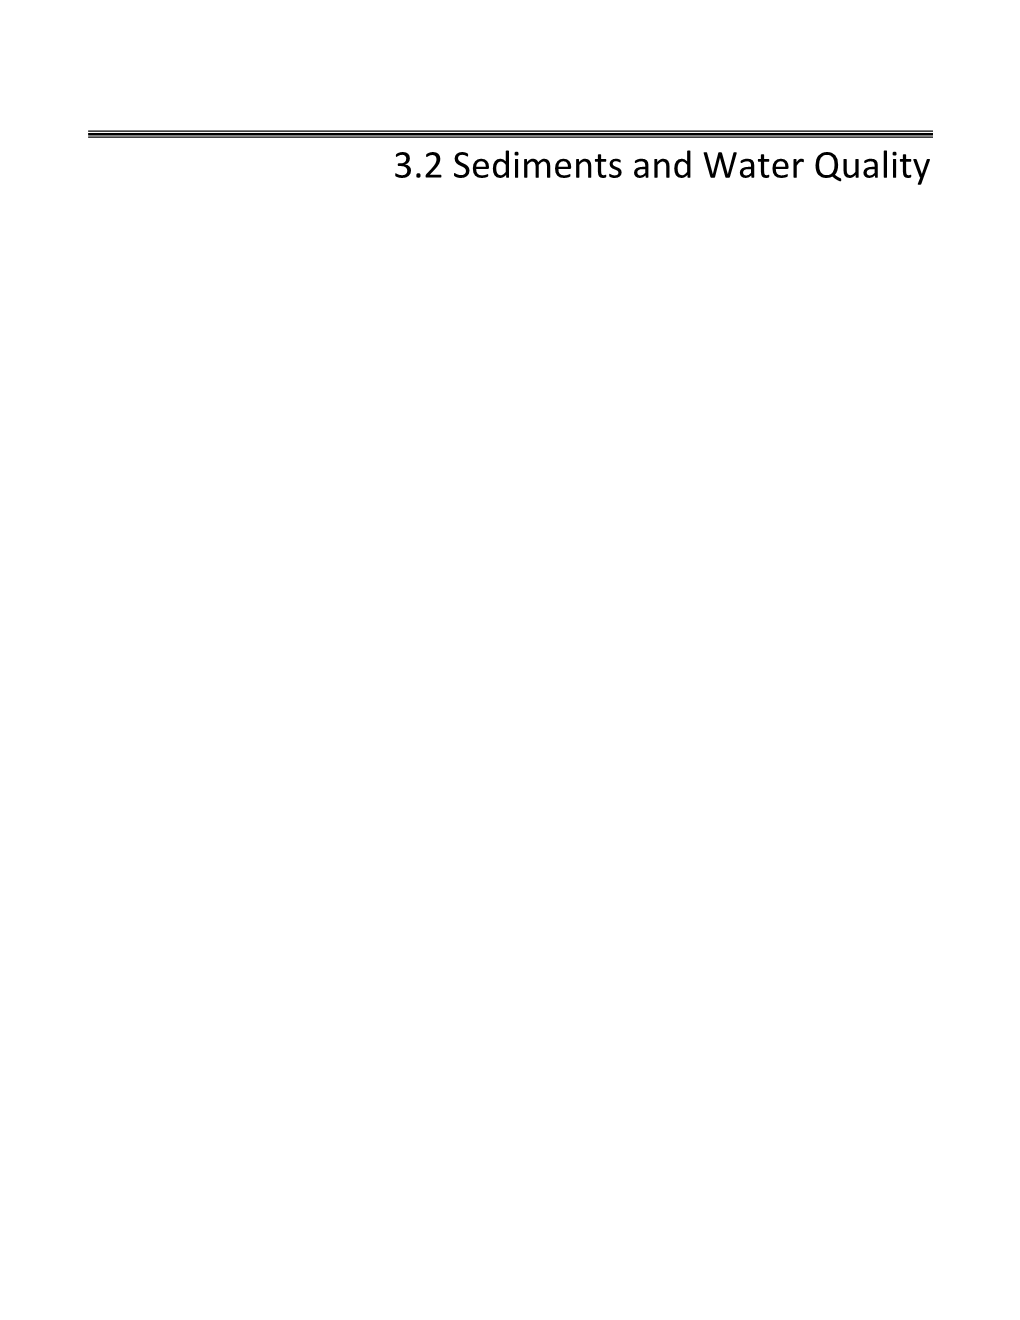 3.2 Sediments and Water Quality